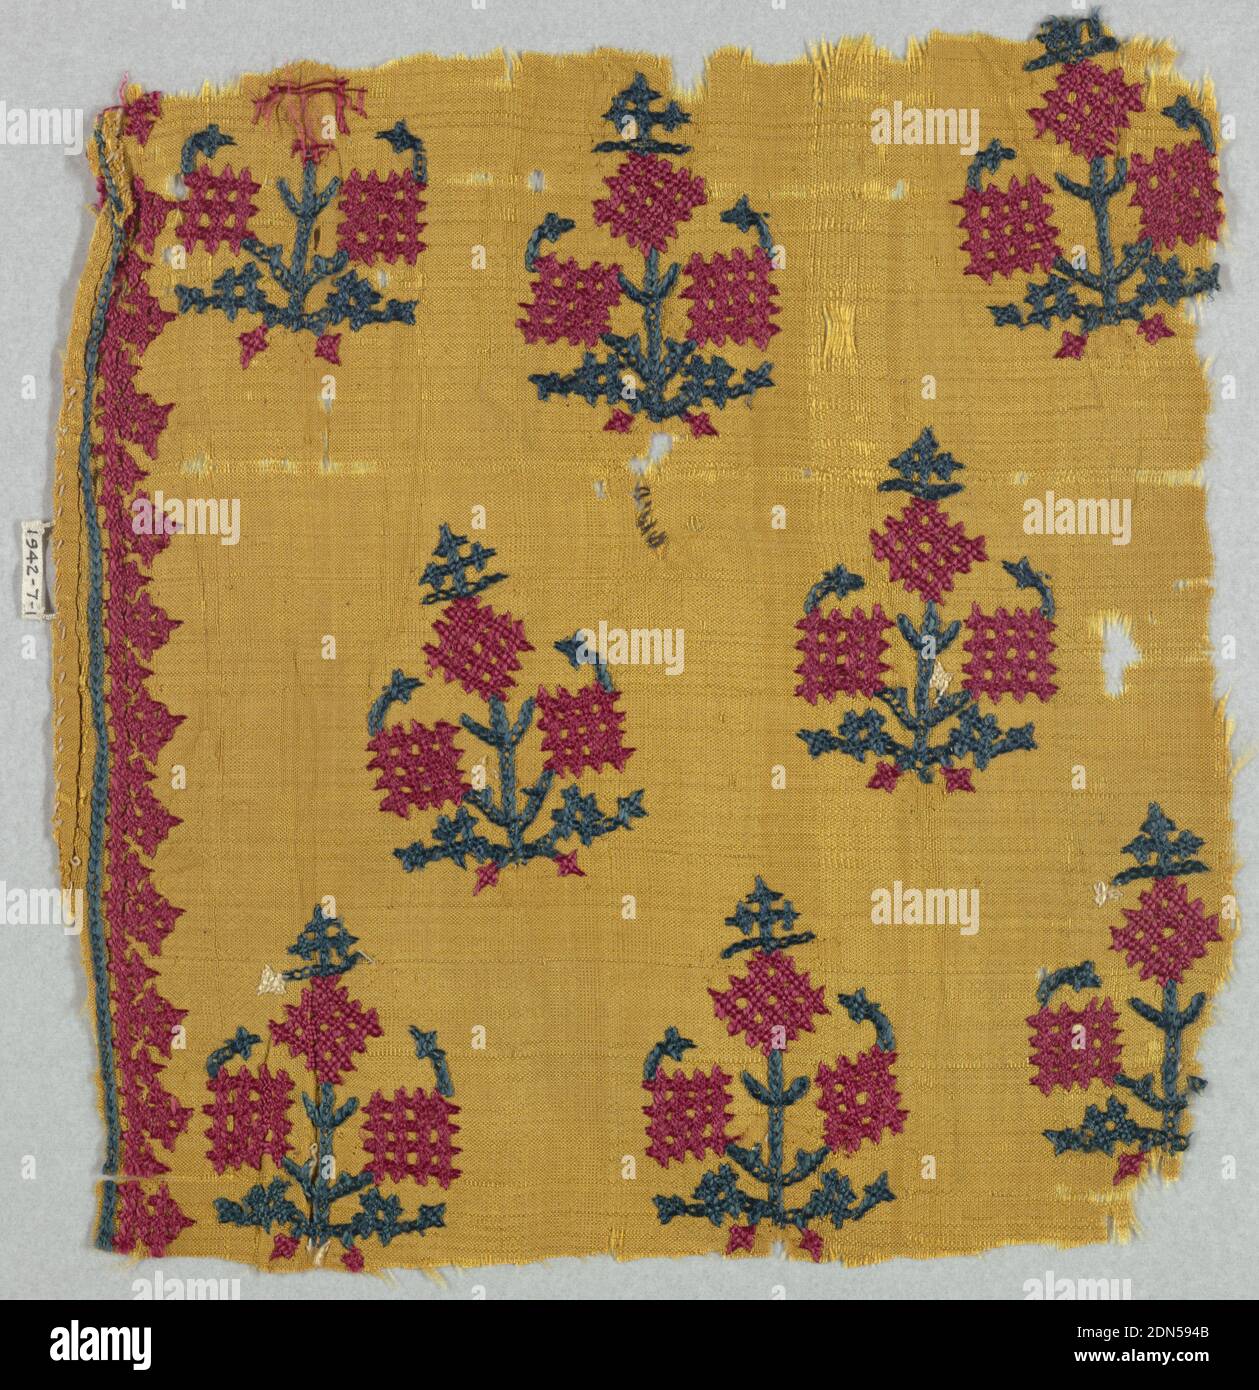 Fragment, Medium: silk Technique: surface stitch embroidery, Conventionalized flowering sprays arranged as detached motifs. Narrow border on one side., India, 18th century, embroidery & stitching, Fragment Stock Photo